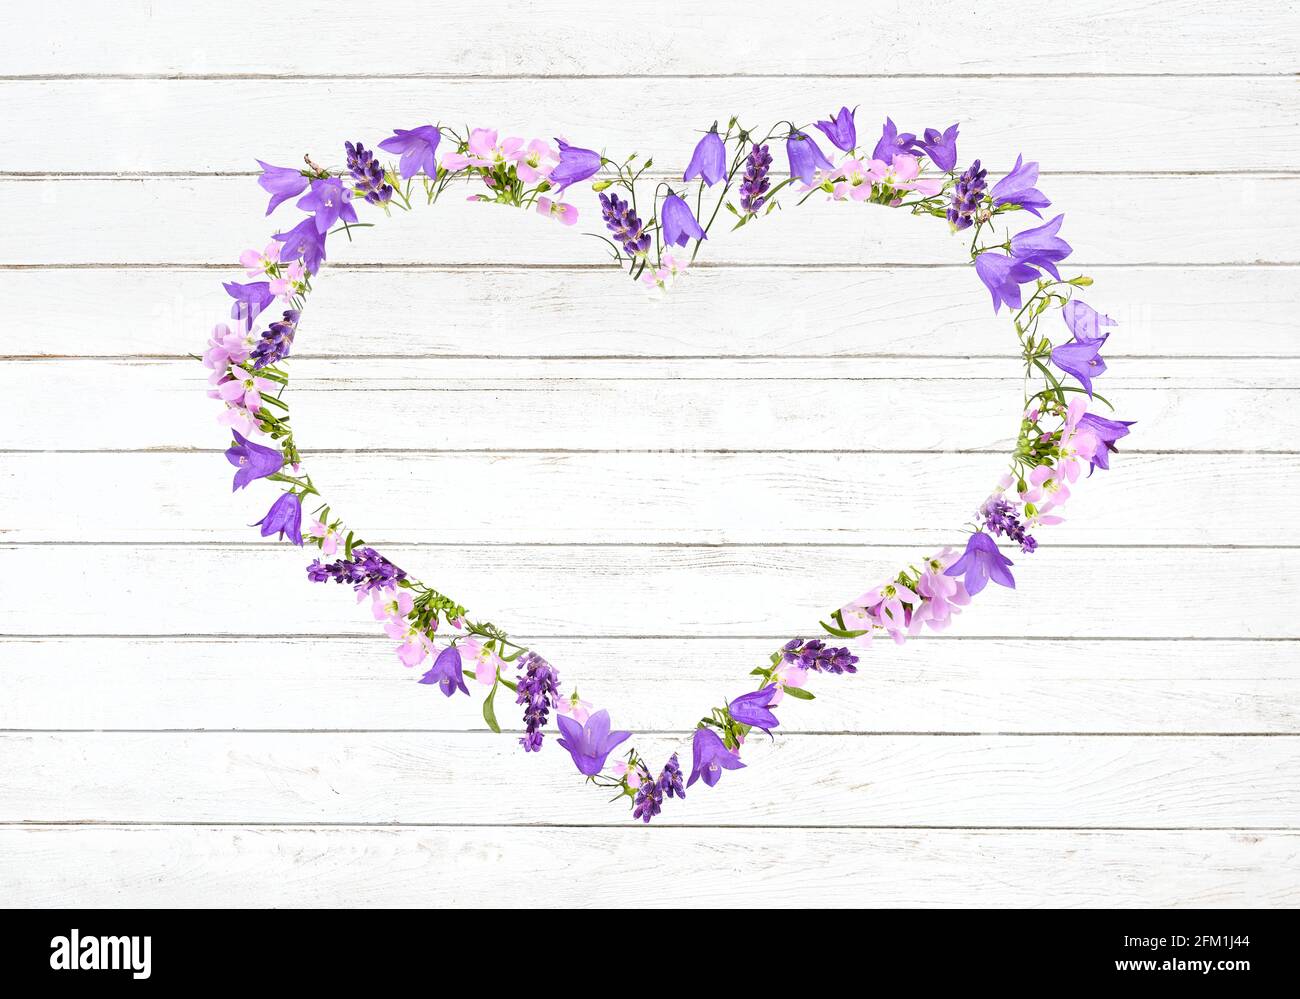 Bellflowers and meadow flowers as a heart frame Stock Photo